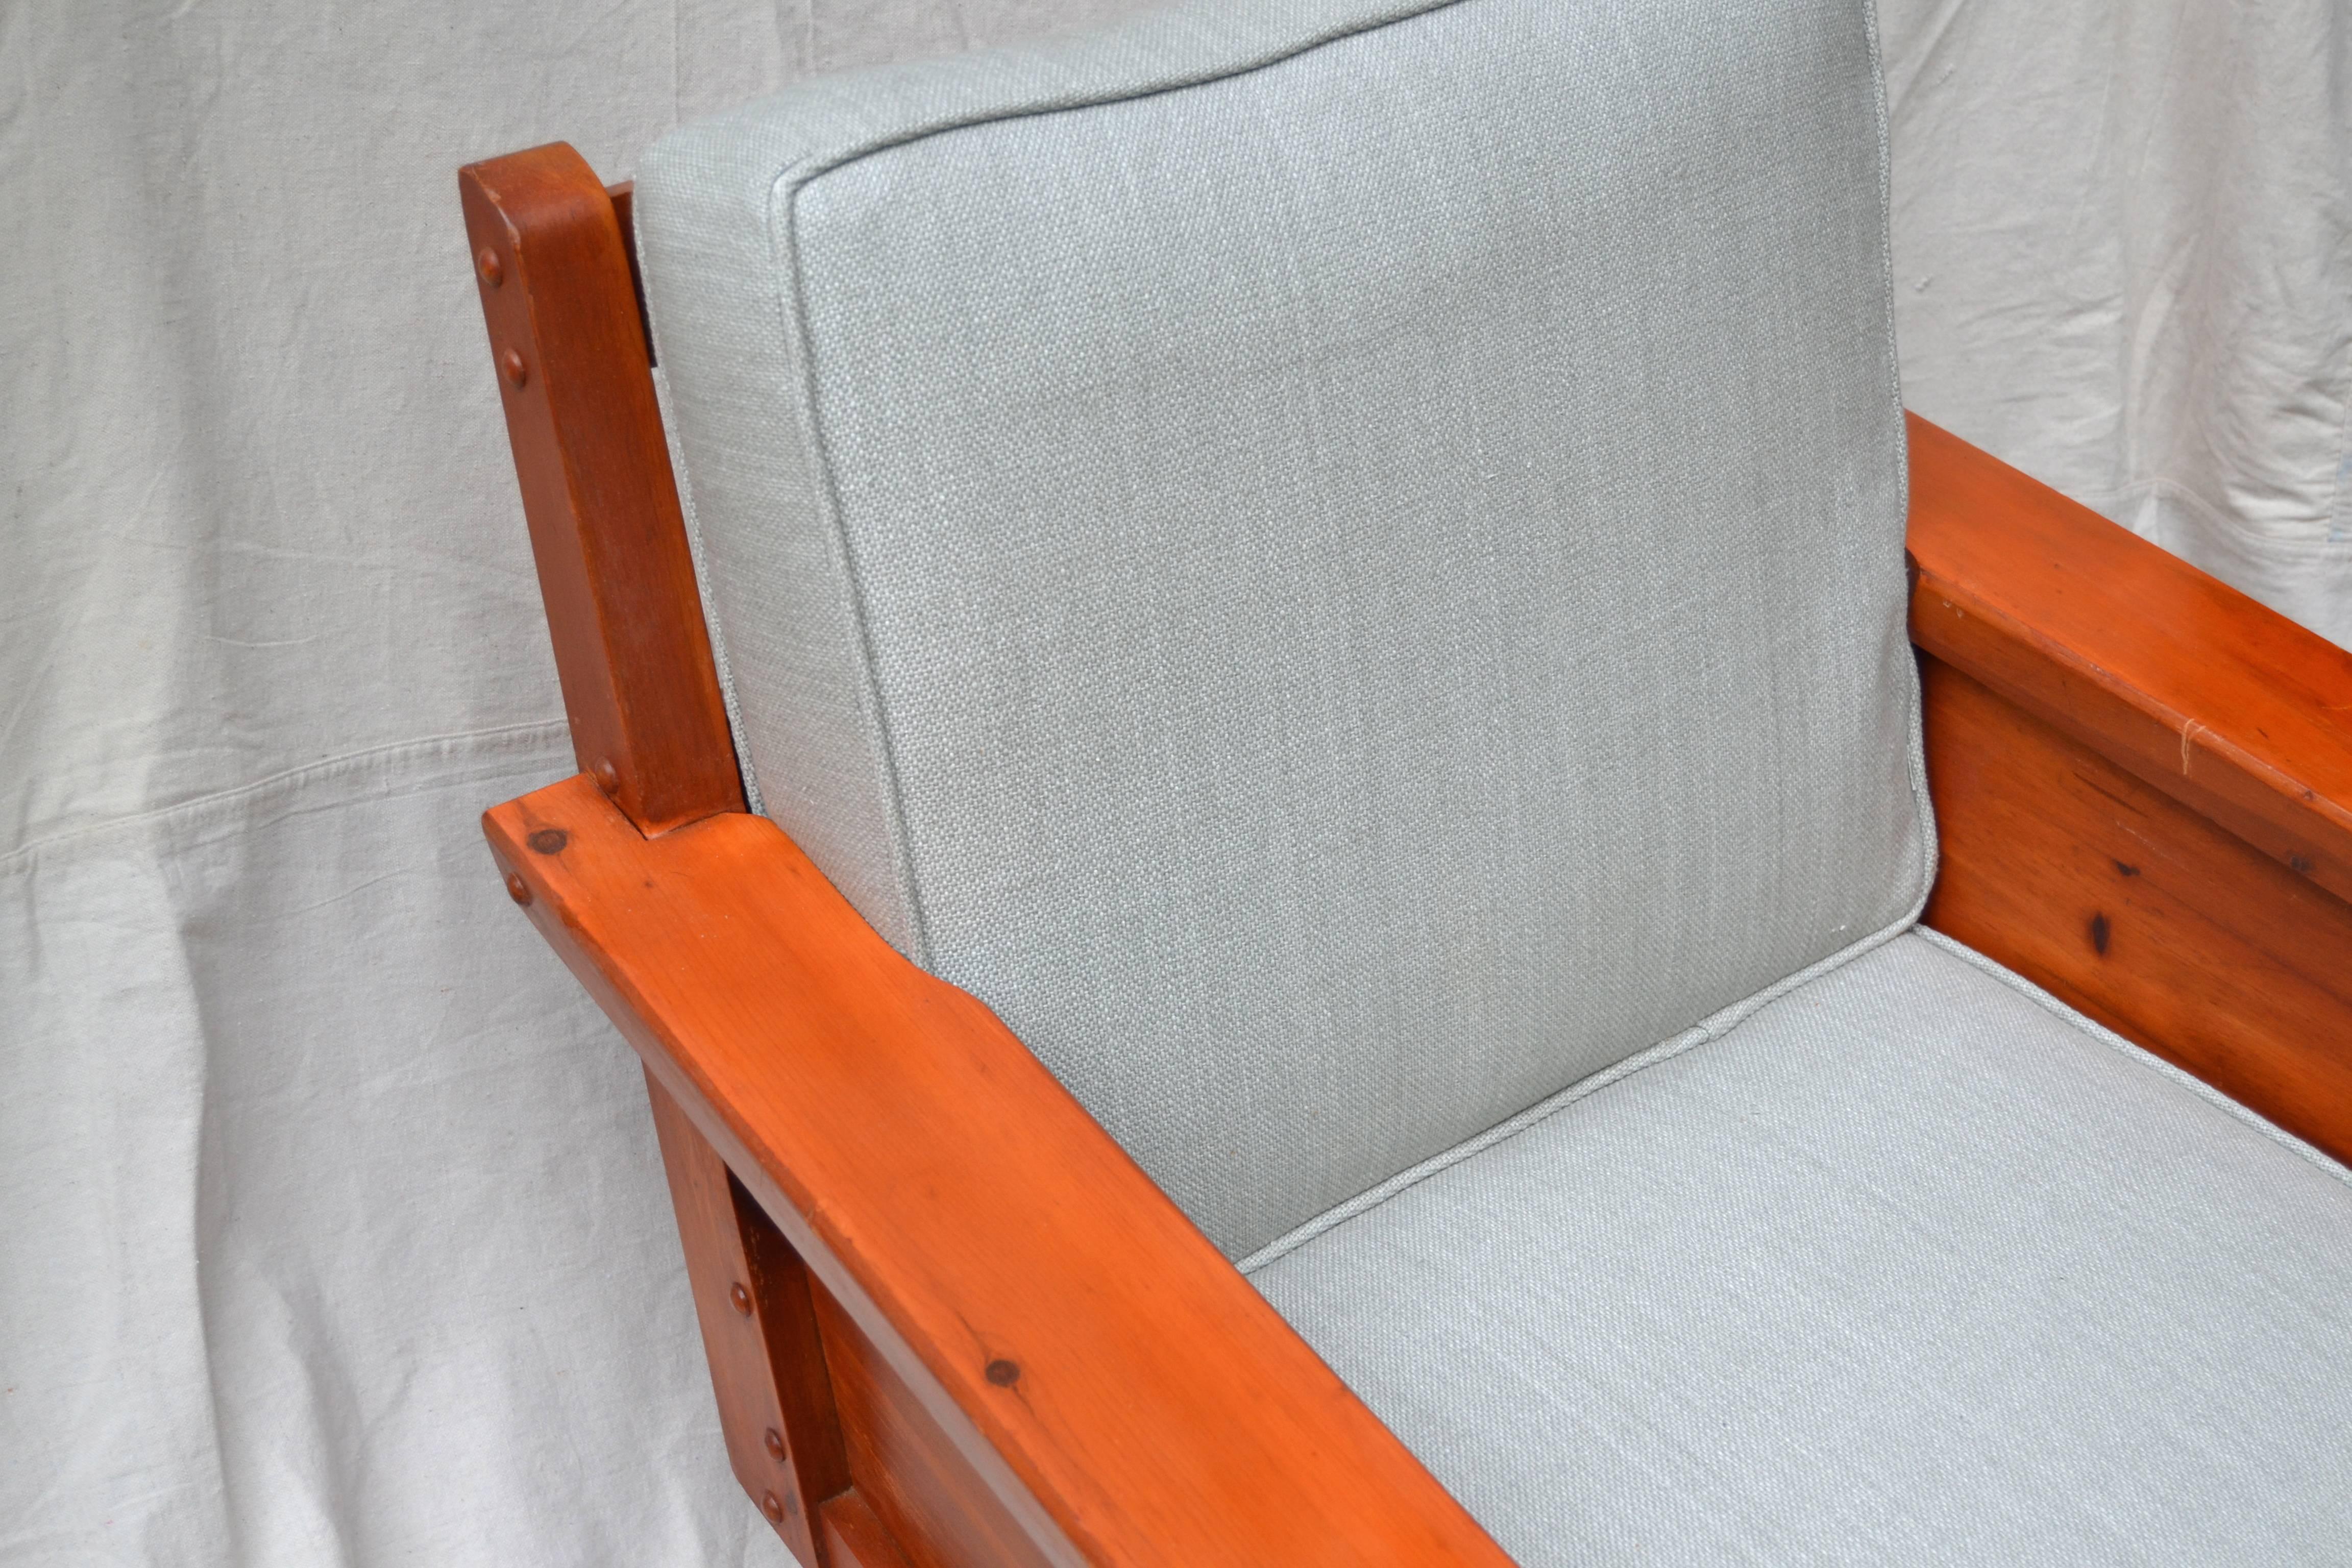 Pair of comfortable and sturdy knotty pine club chairs by the stylish Mid-Century designer and manufacturing firm Habitant Shops of Bay City Michigan. The carefully crafted stained pine chairs have a wonderful casual chic, perfect for the chalet,